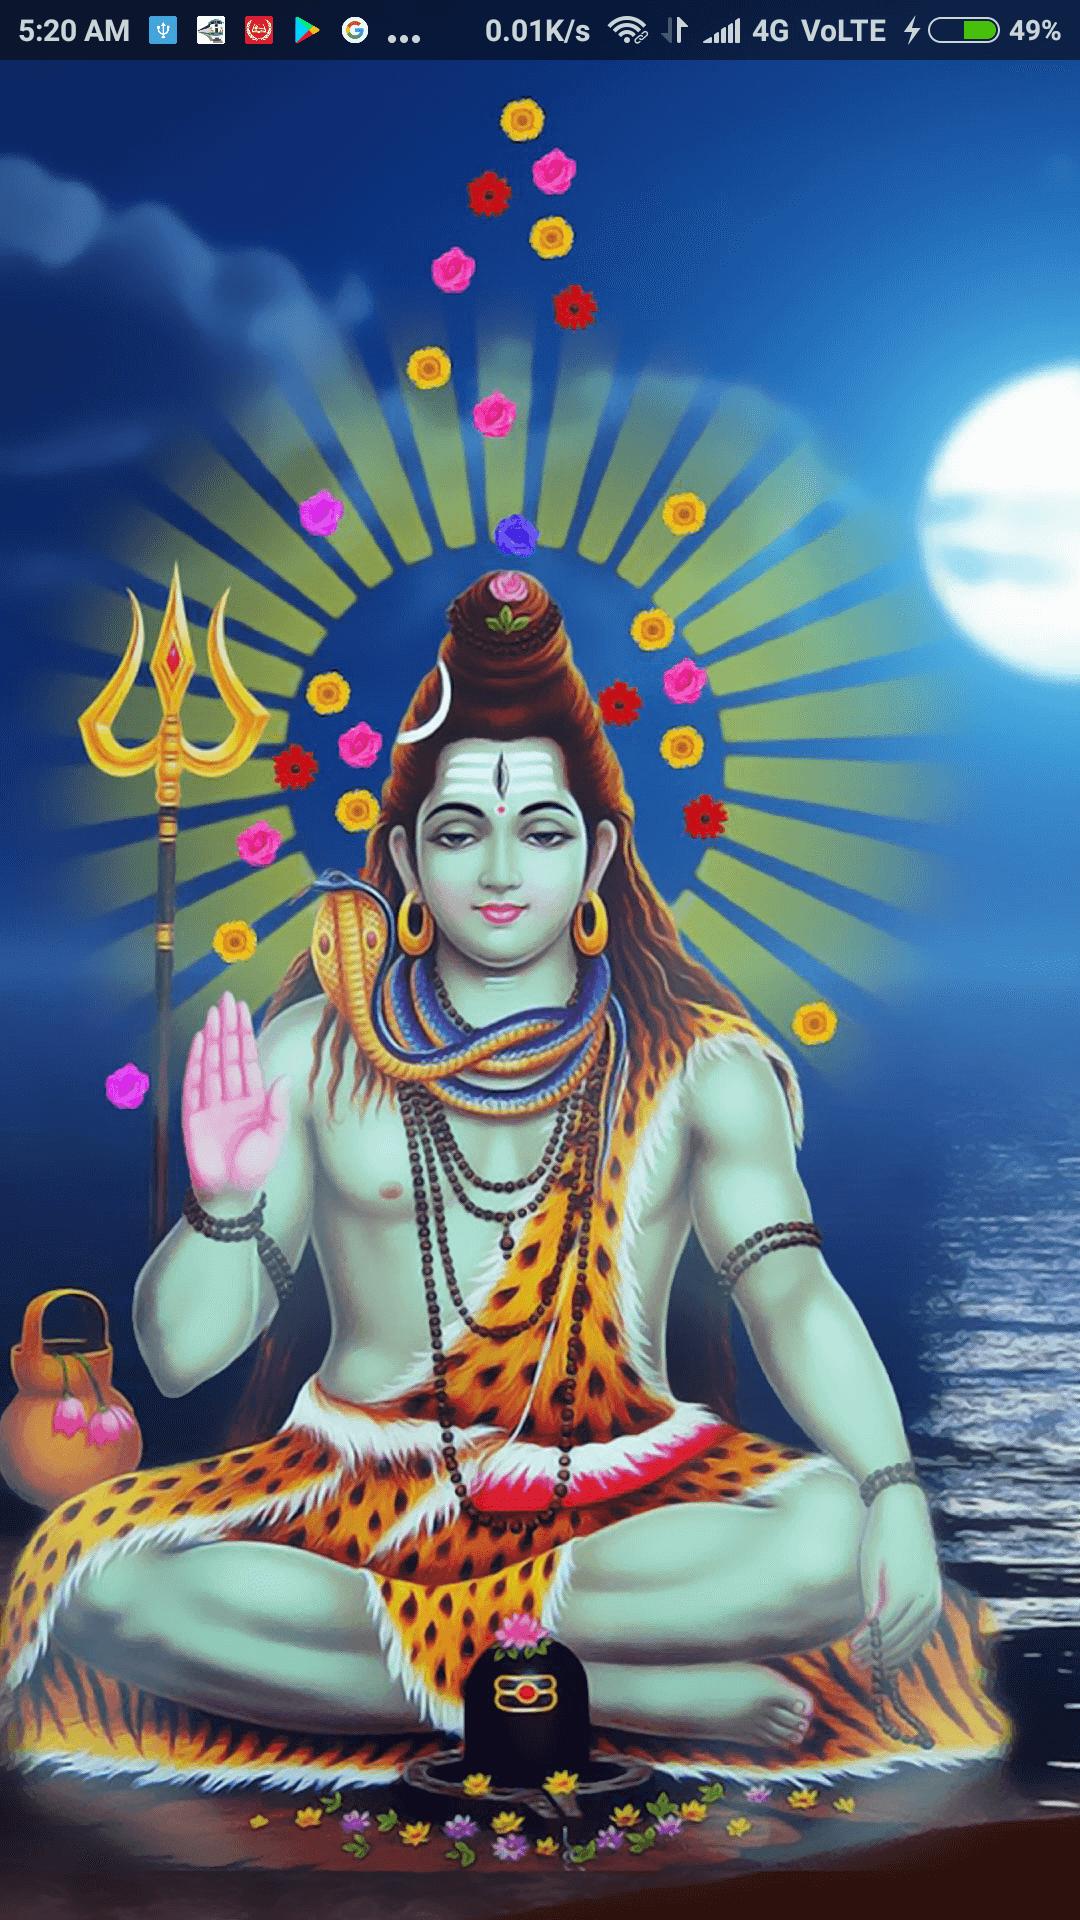 Cool Lord Shiva God Wallpaper Hd Download For Android Mobile wallpaper